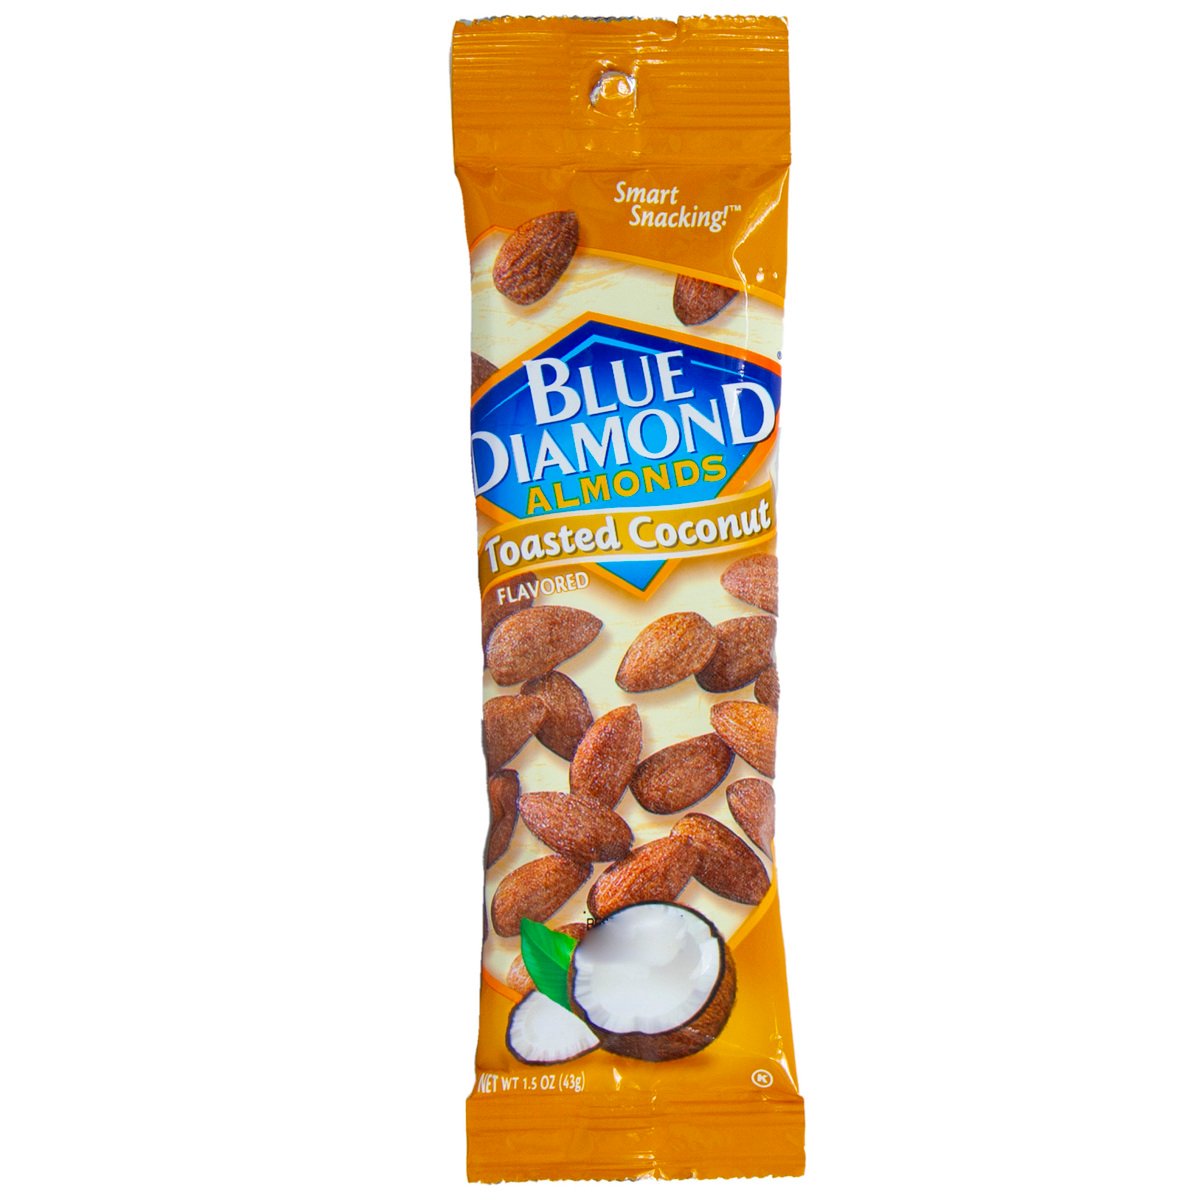 Blue Diamond Almonds Toasted Coconut Flavored 43 g